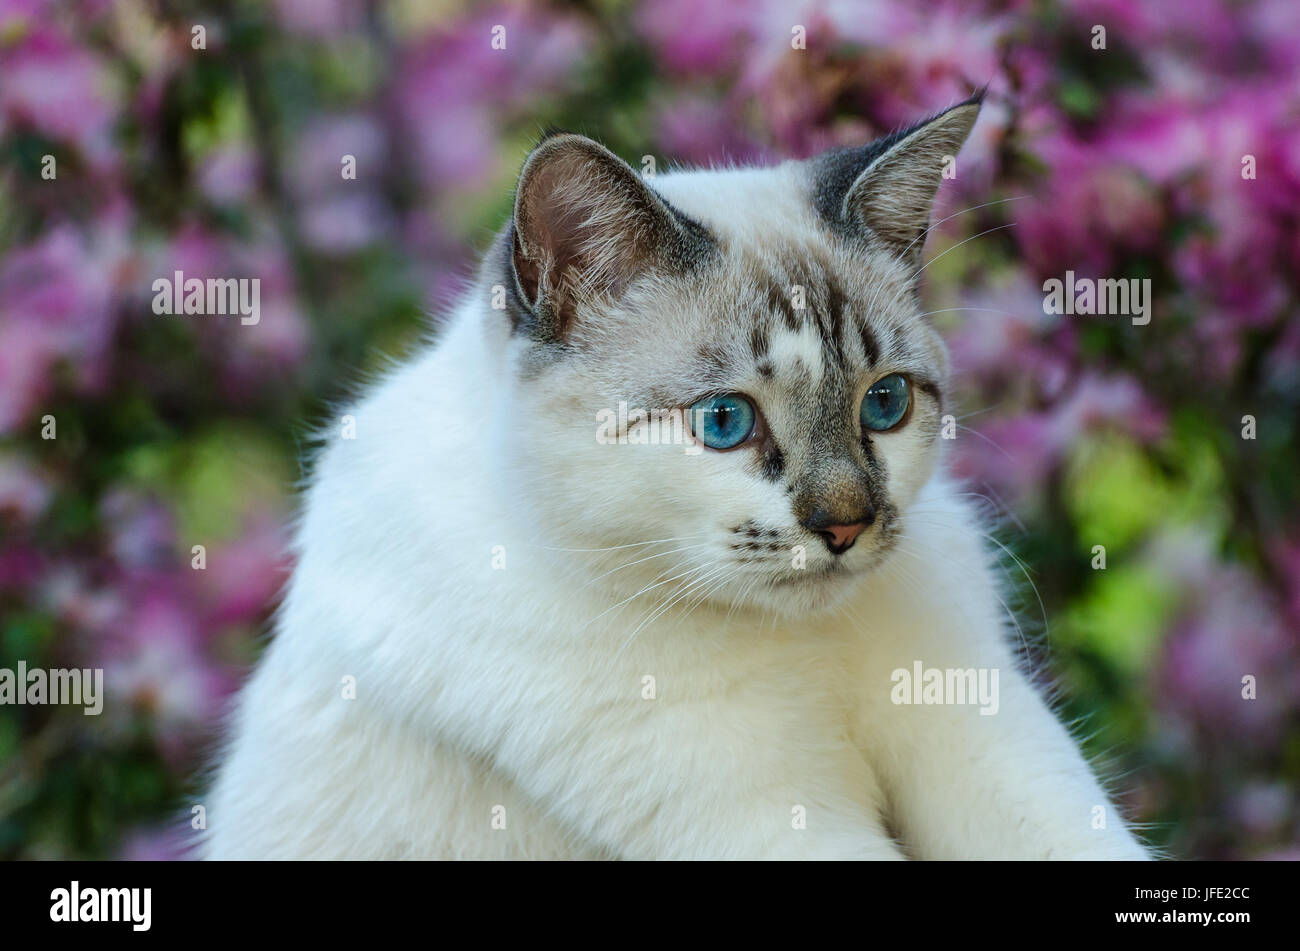 Cute cat with blue eyes playing around Stock Photo